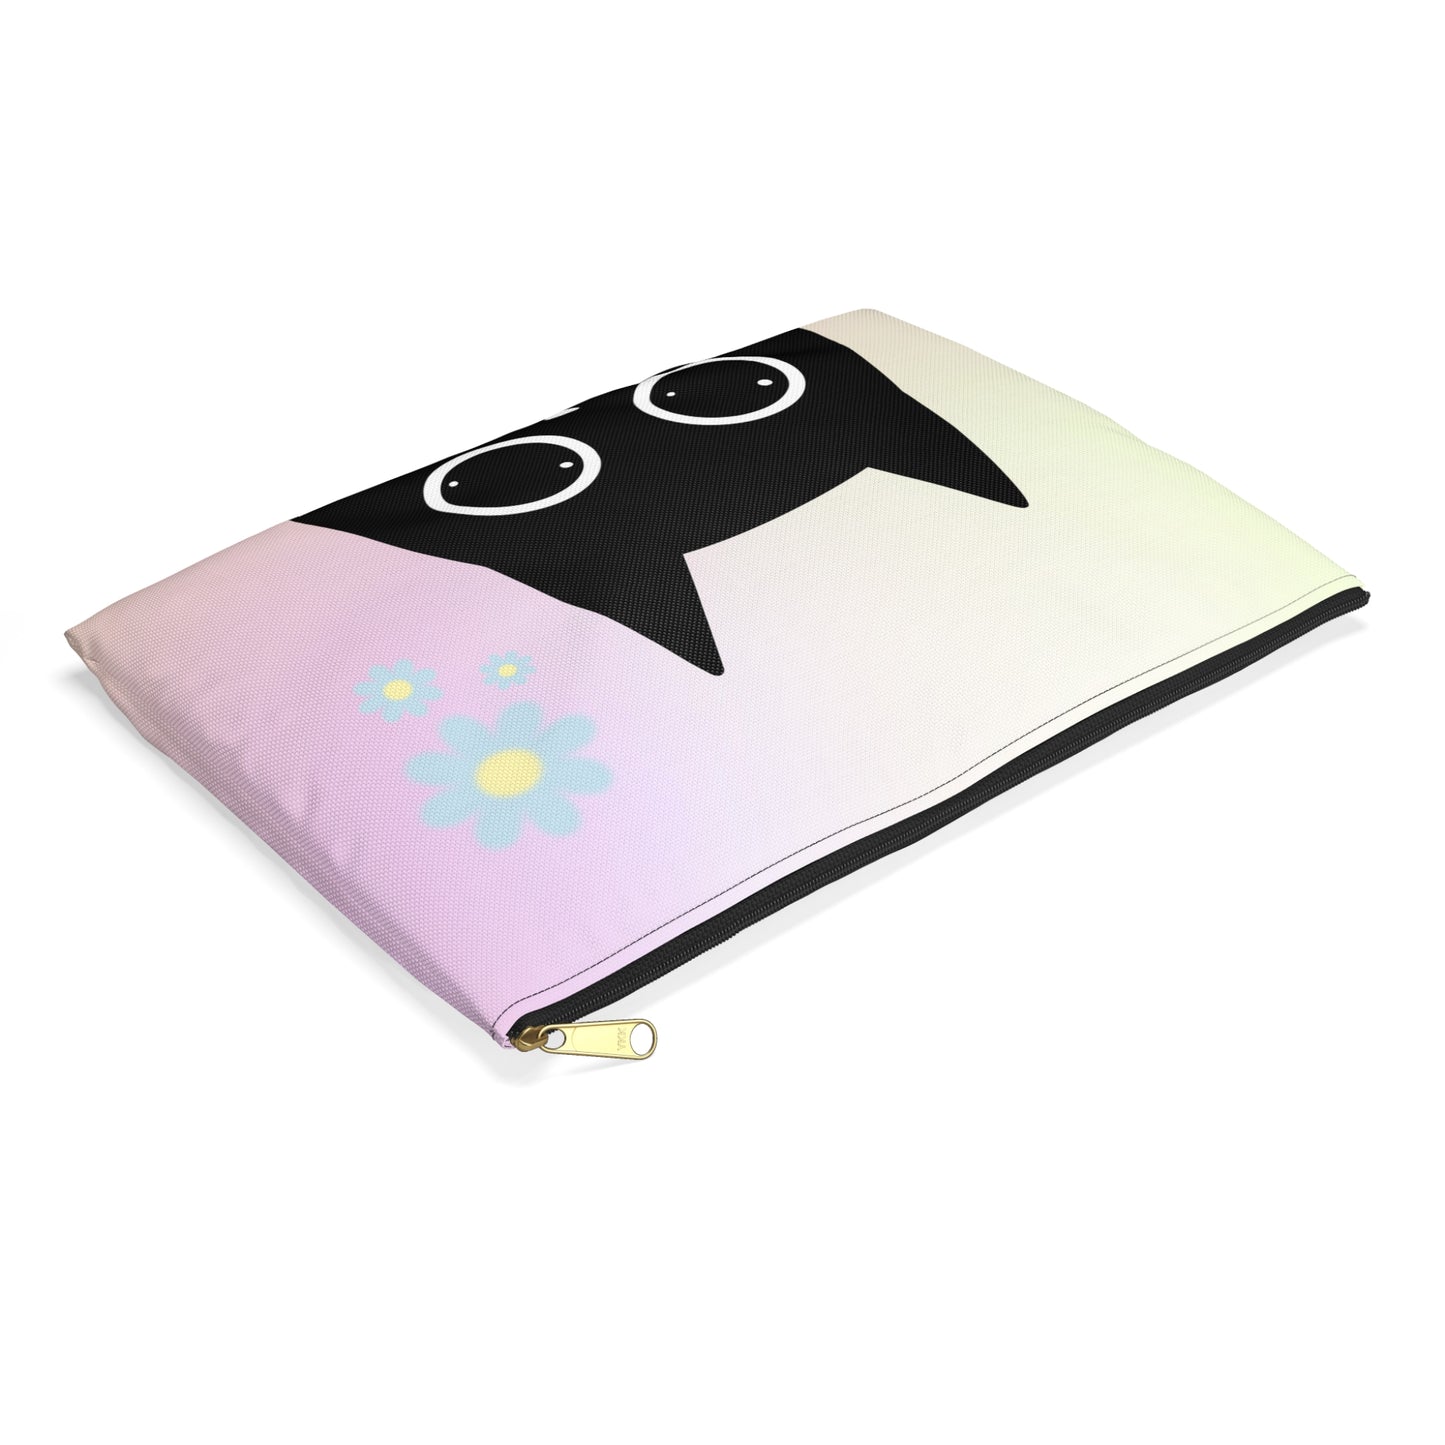 Adorable Cat Anime Accessory Pouch